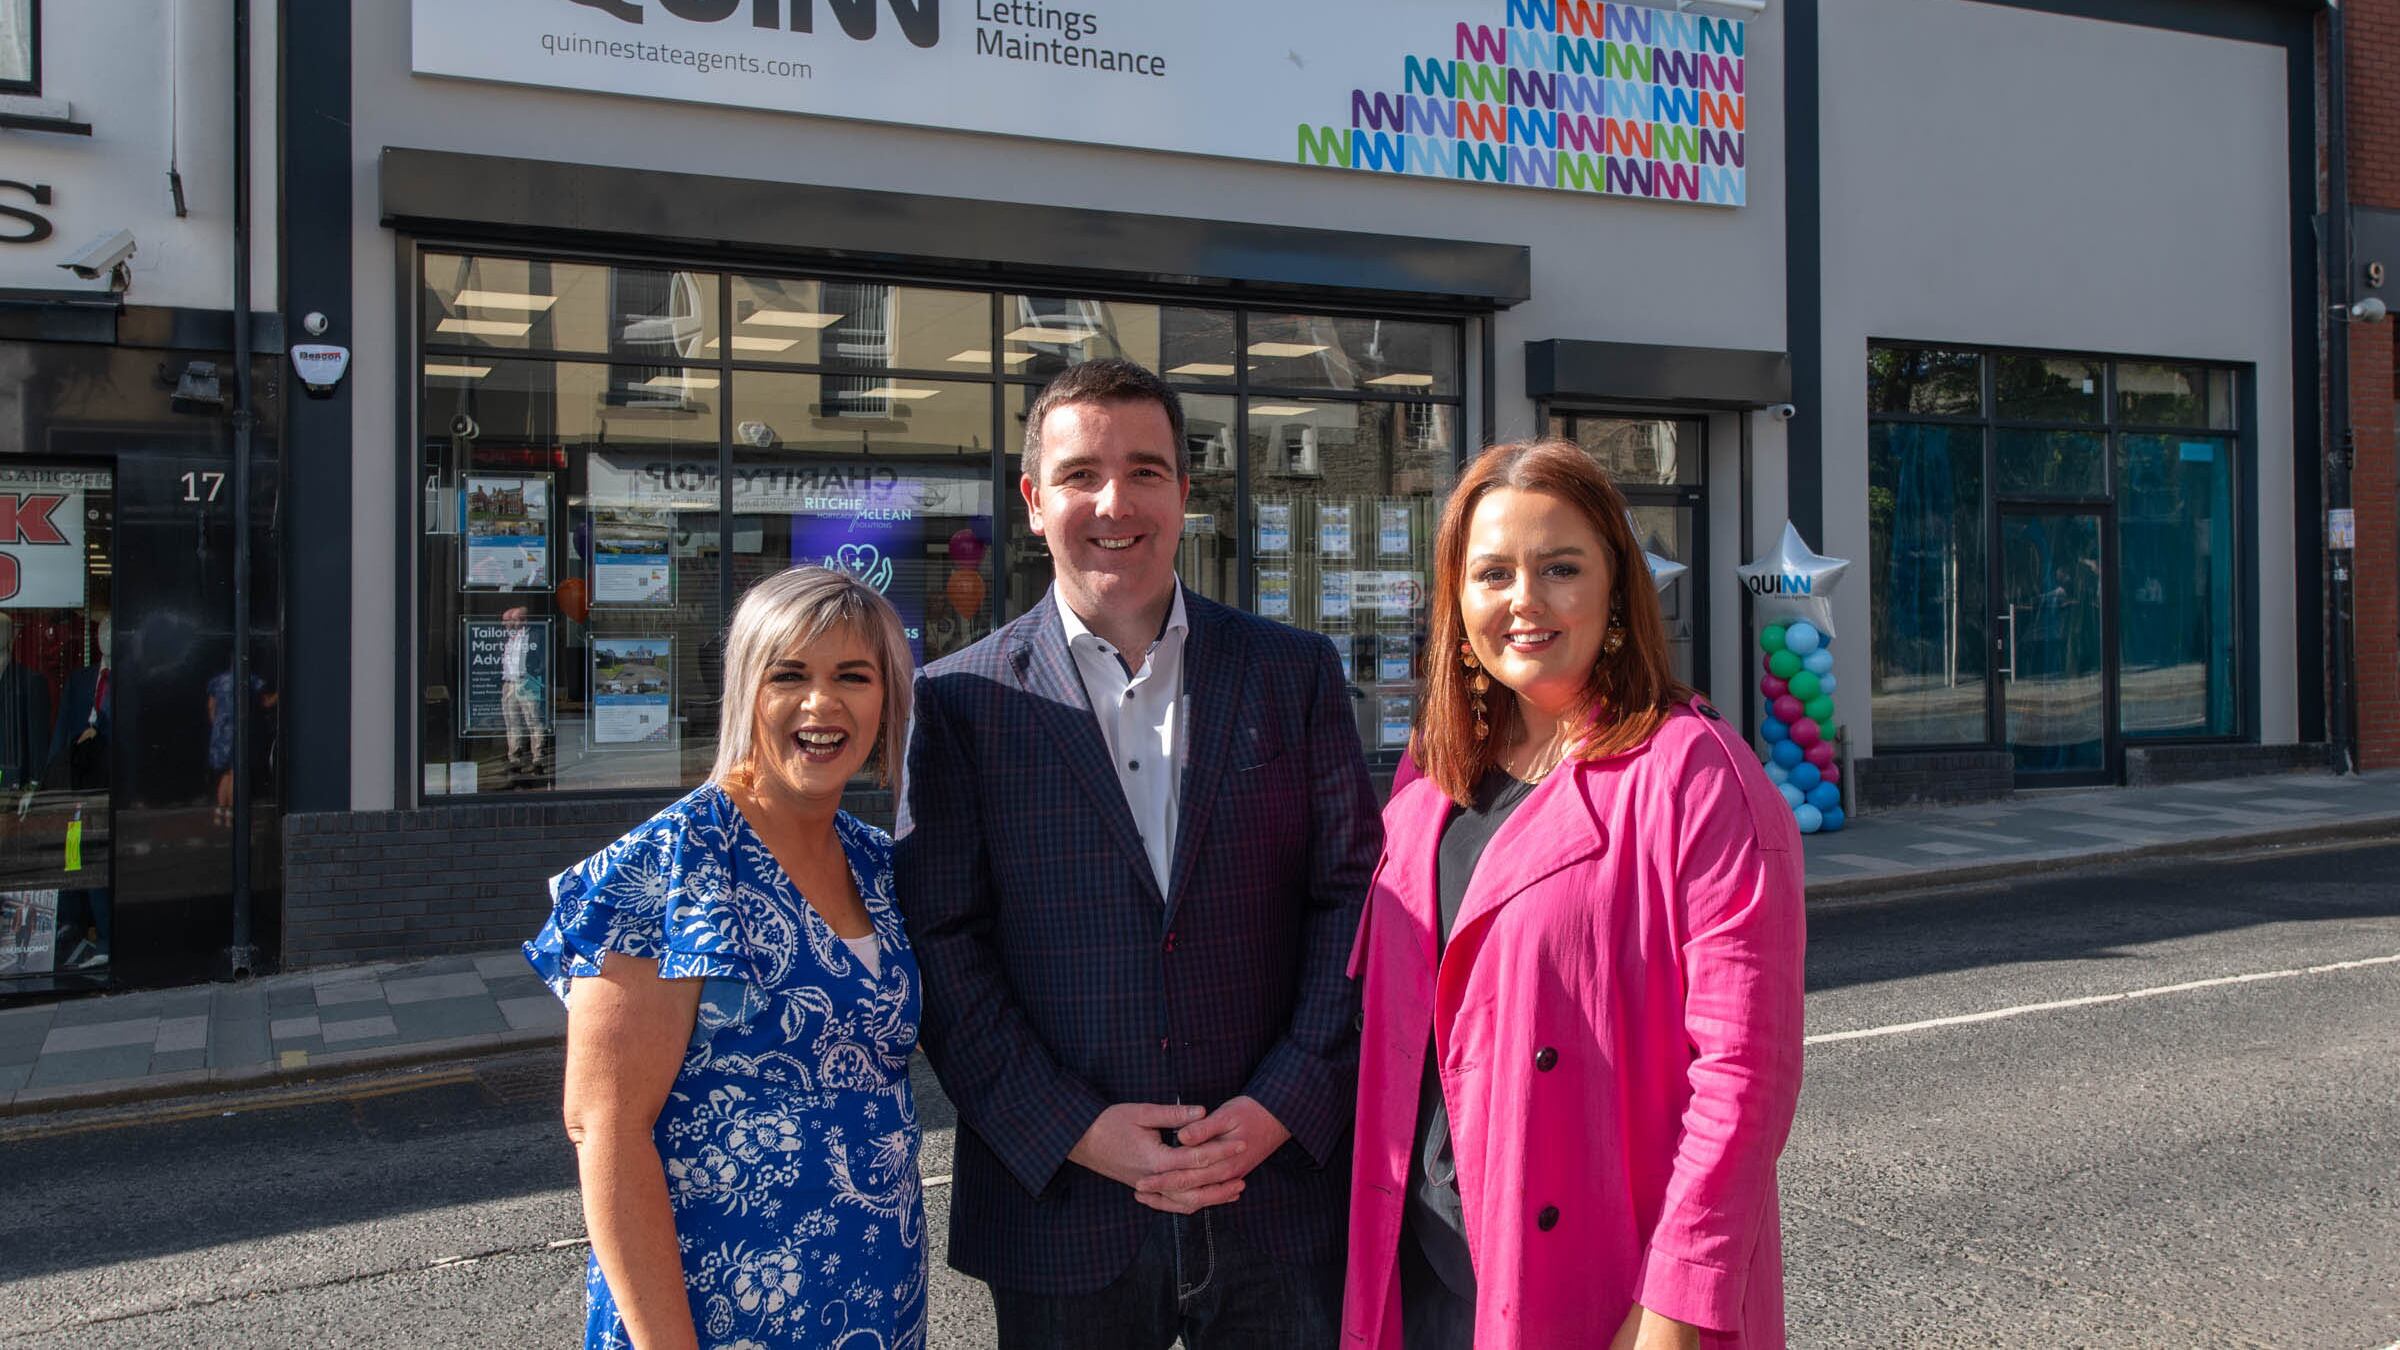 Quinn Estate Agents opens new office in flood-hit Downpatrick